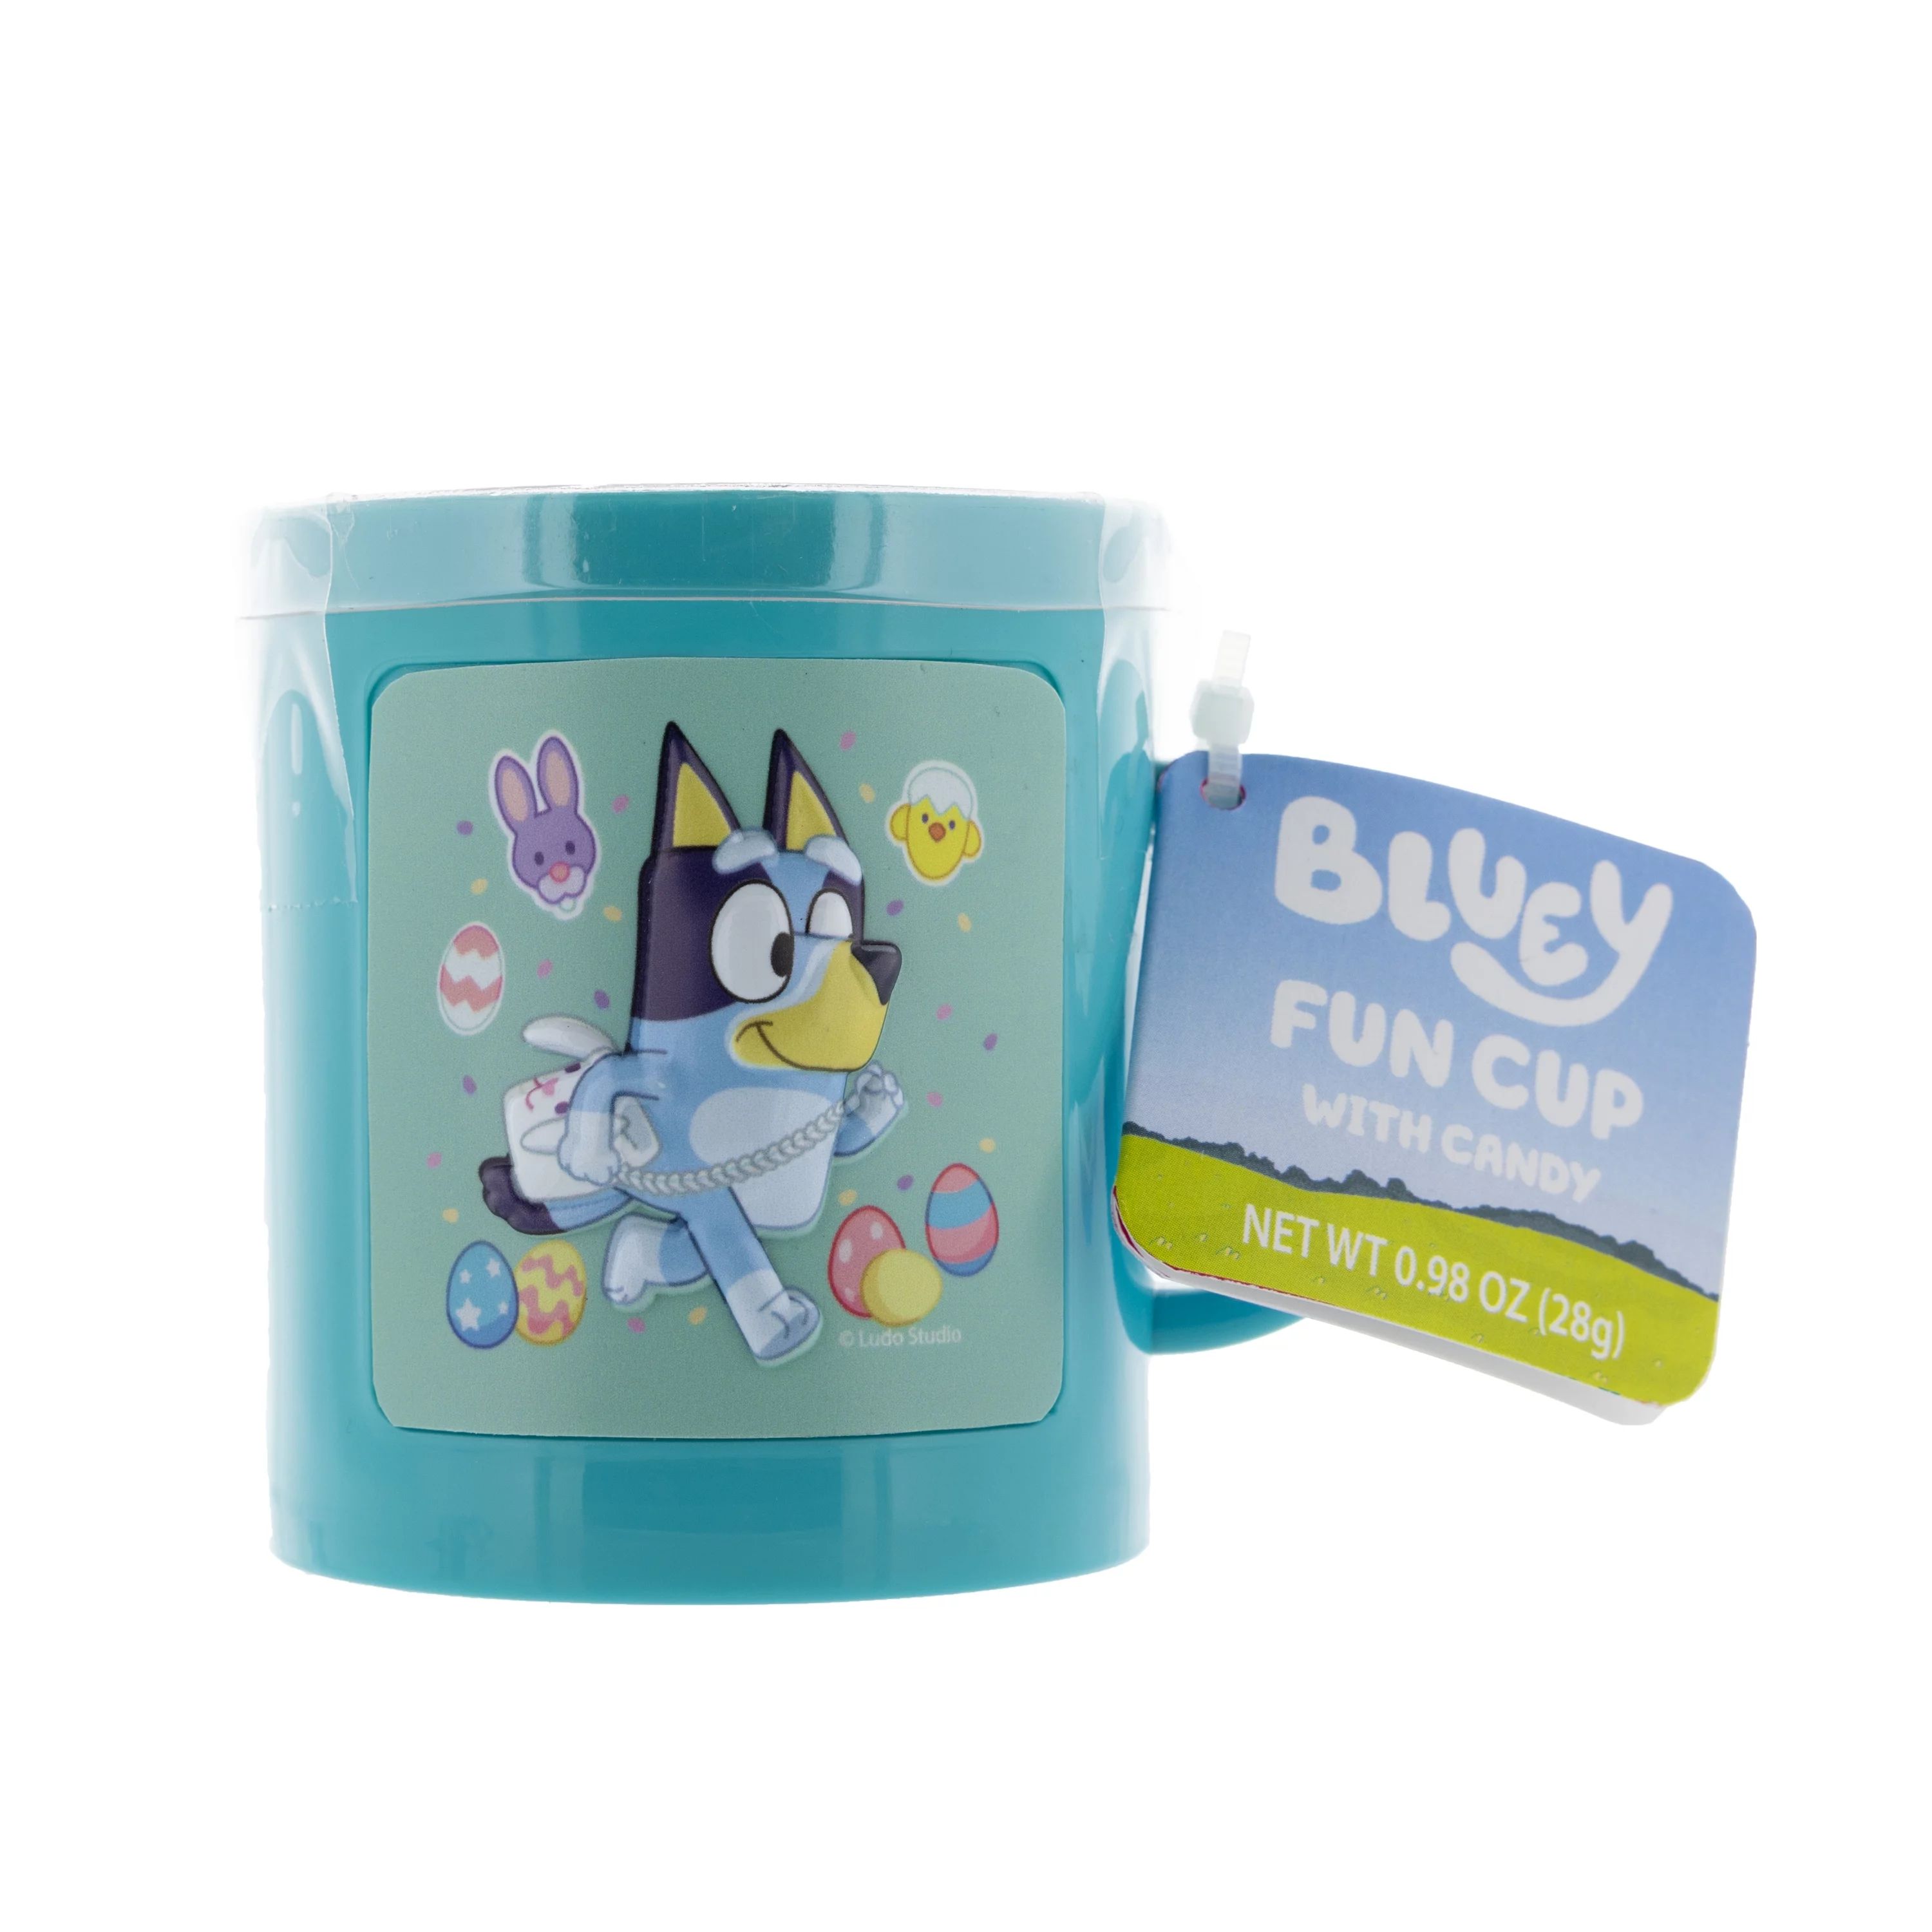 Galerie Small Bluey Fun Cup with Candy, 0.98 oz - Walmart.com | Walmart (US)